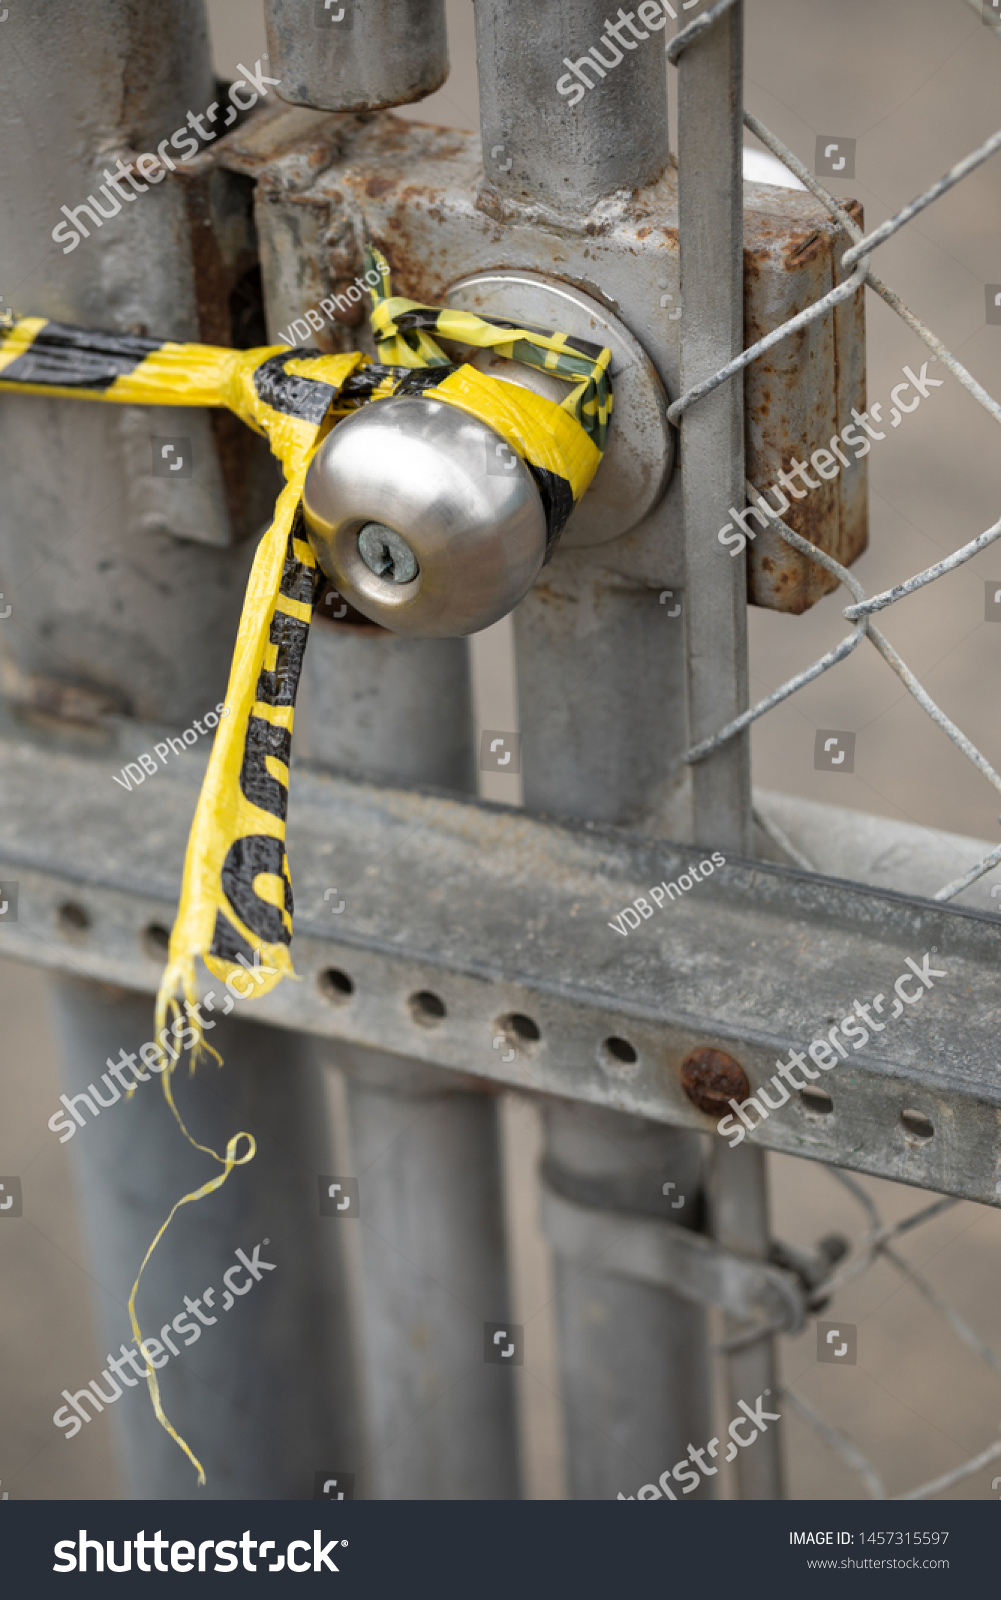 Chainlink Tied Up